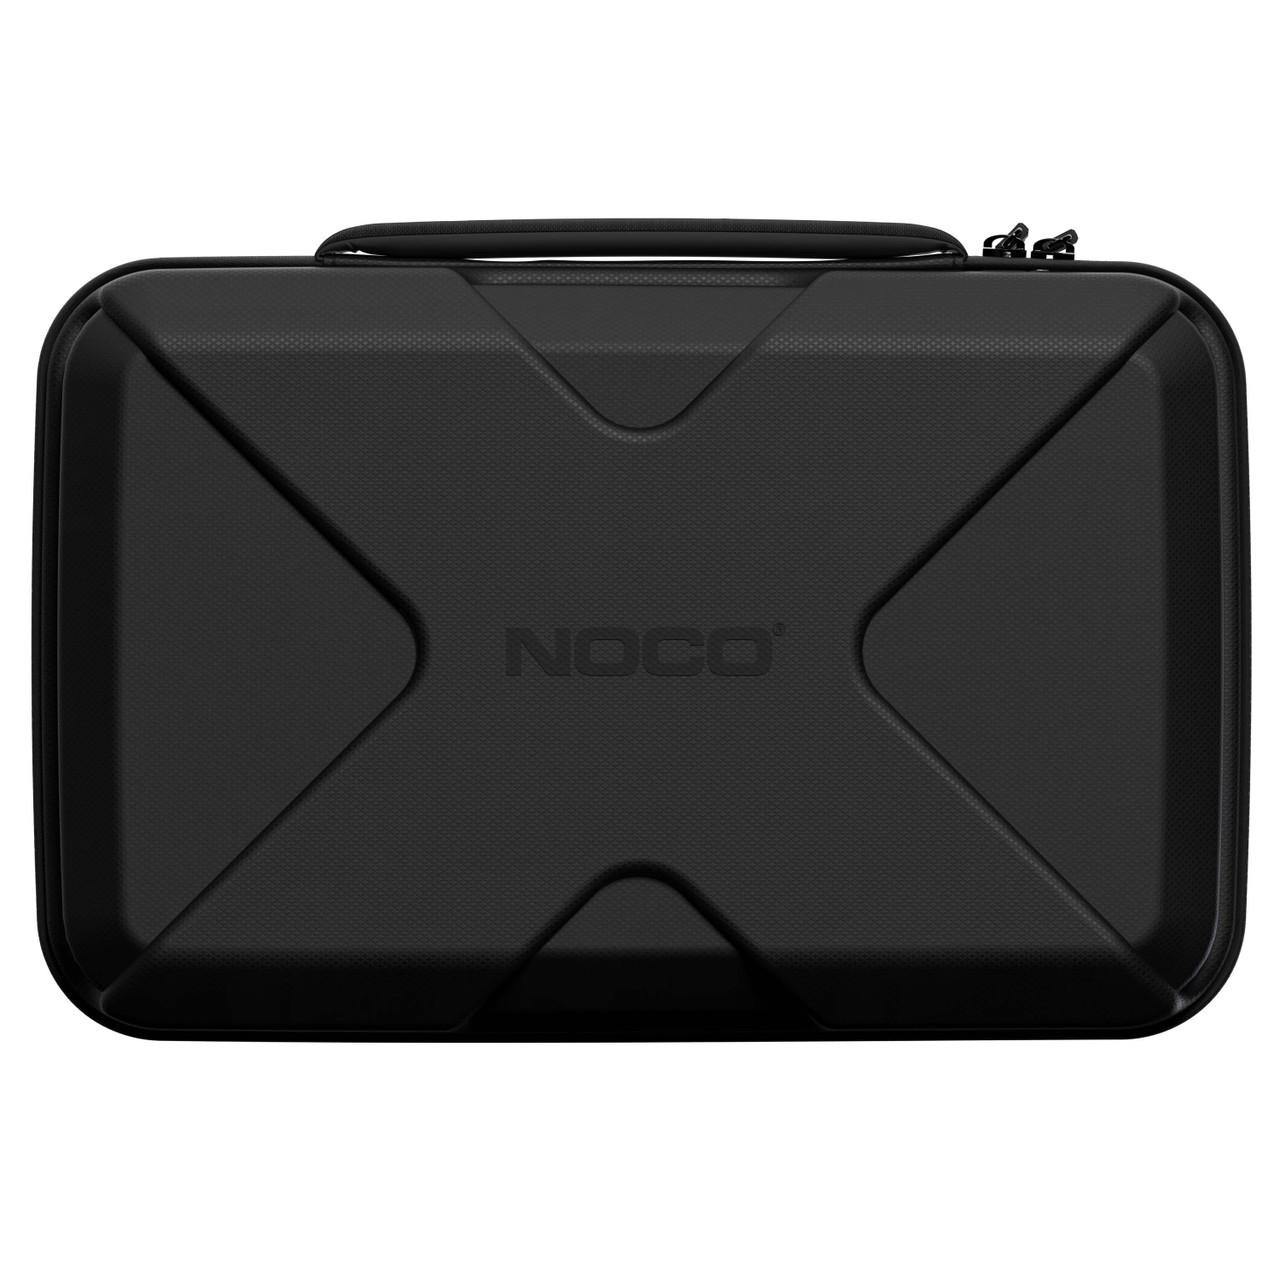 Noco Boost X Eva Protection Case For Gbx155 Ultrasafe Lithium Jump Starter  